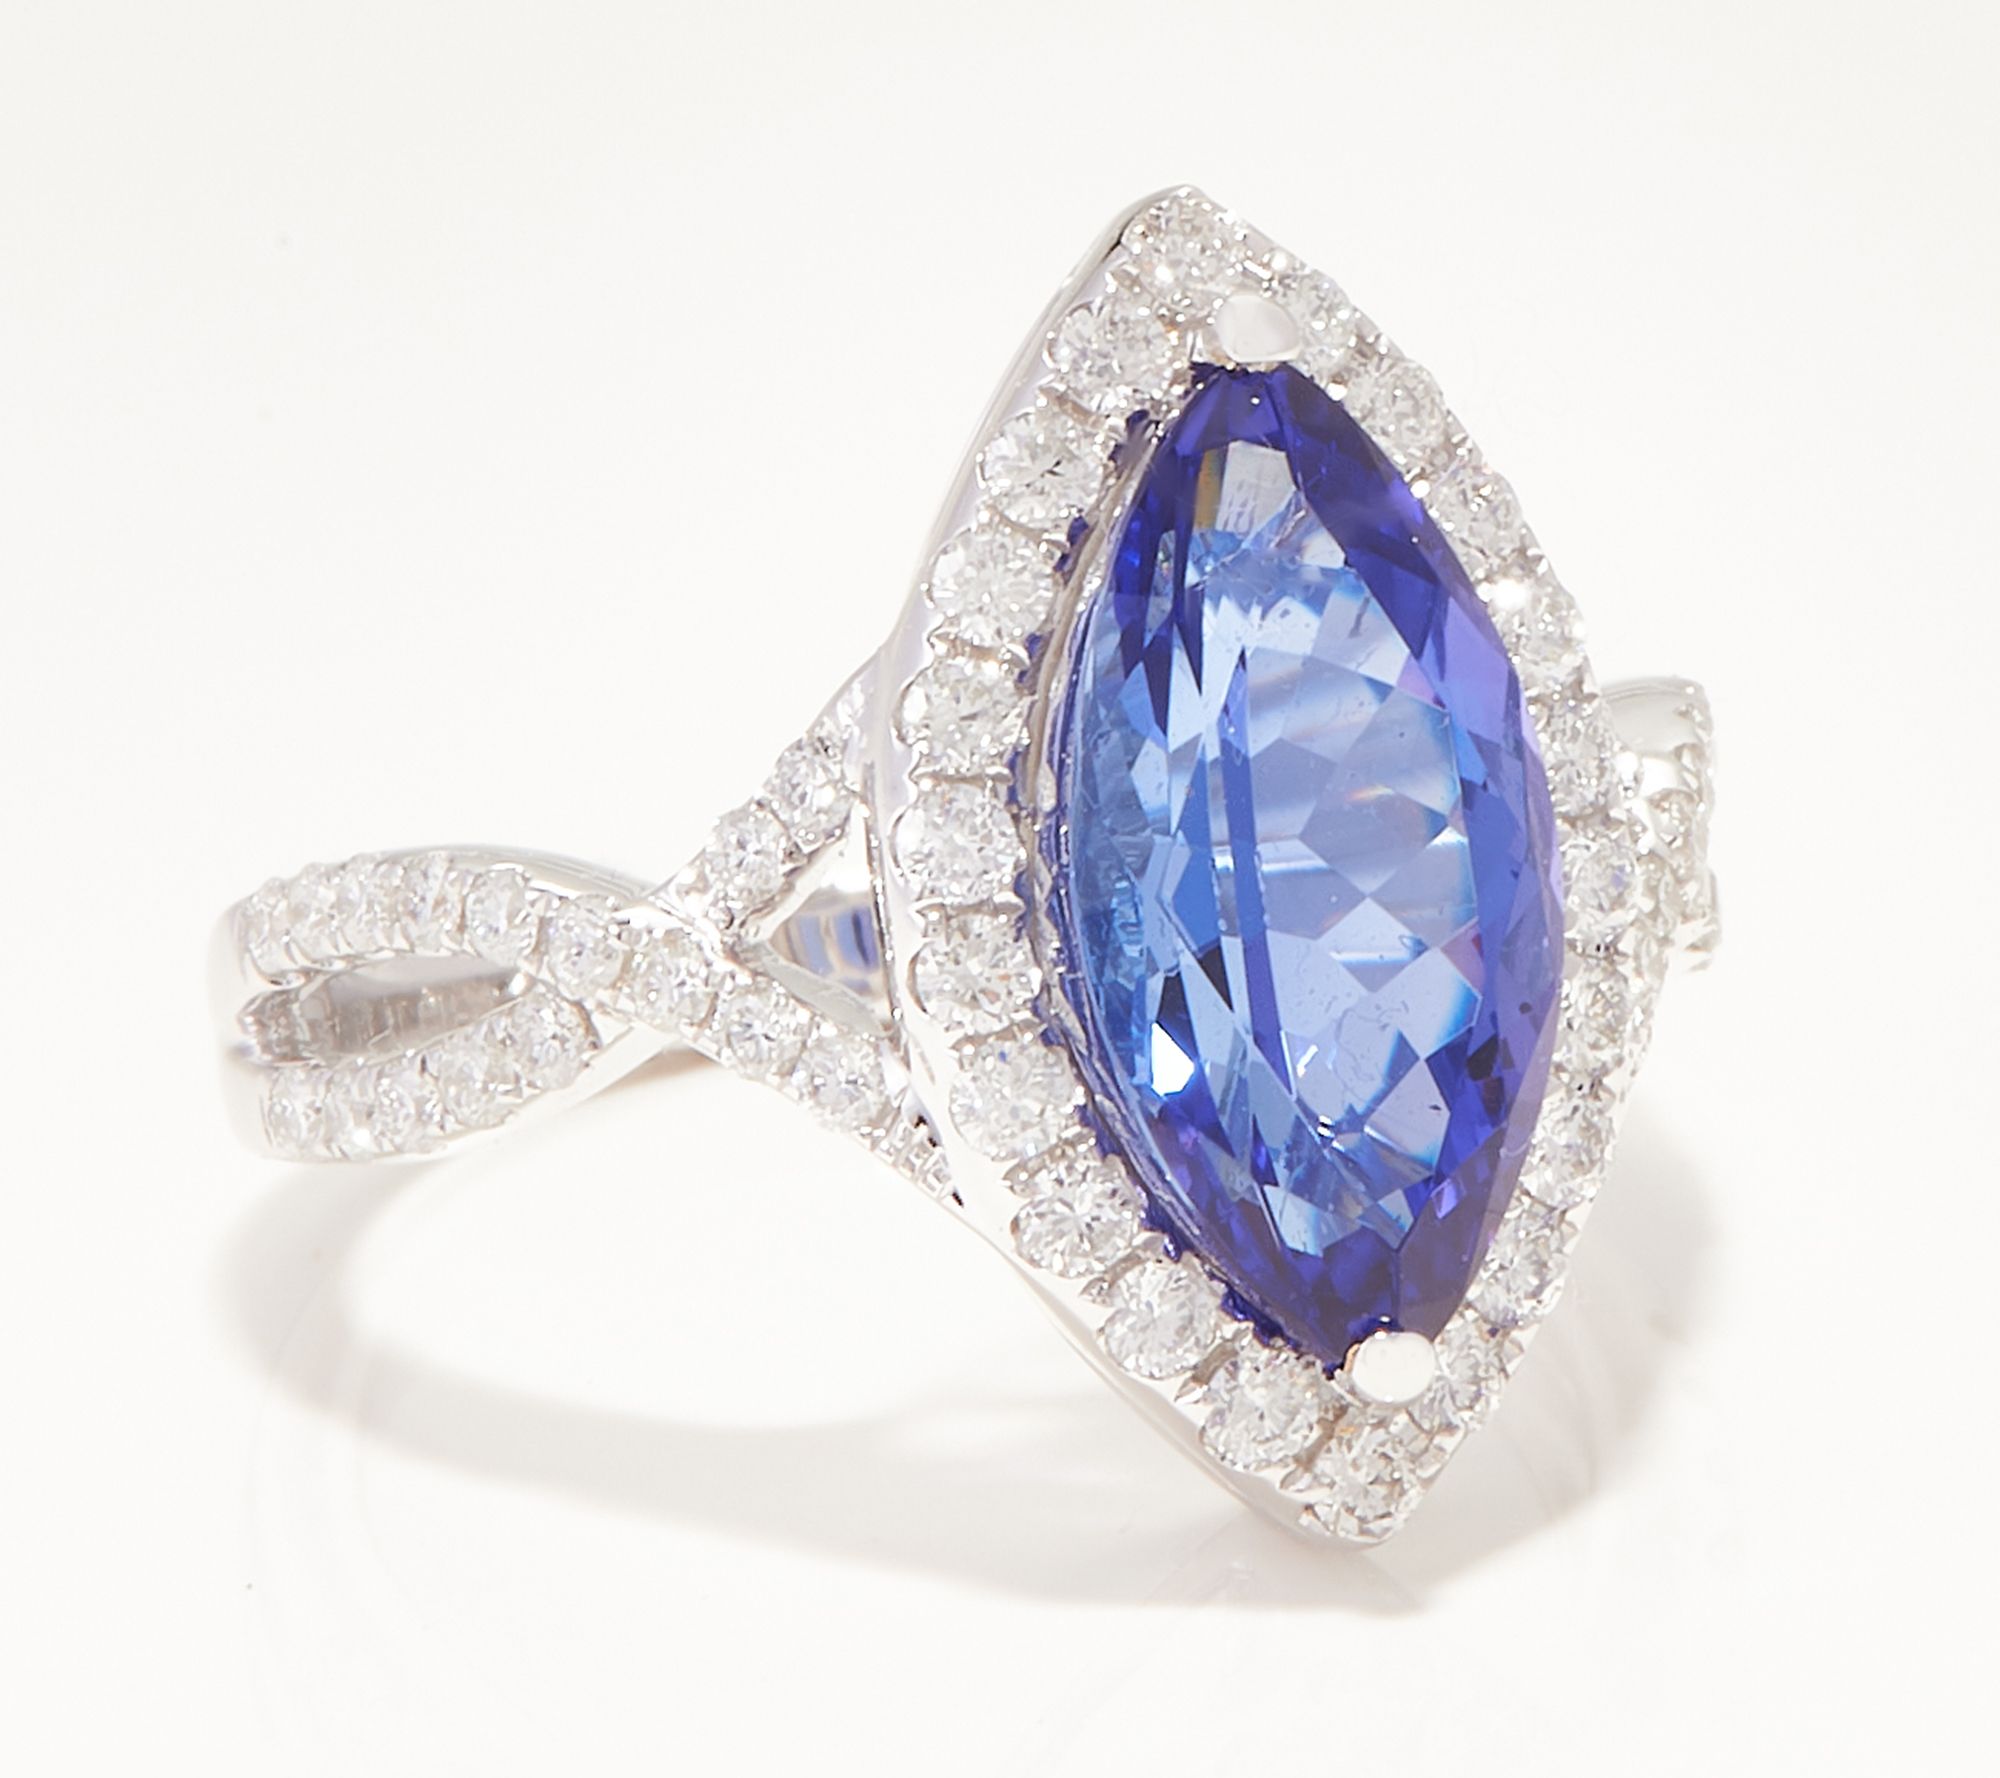 Affinity Gems Marquise Cut Tanzanite and Diamond Ring, 2.35 cttw, 14K - J360477